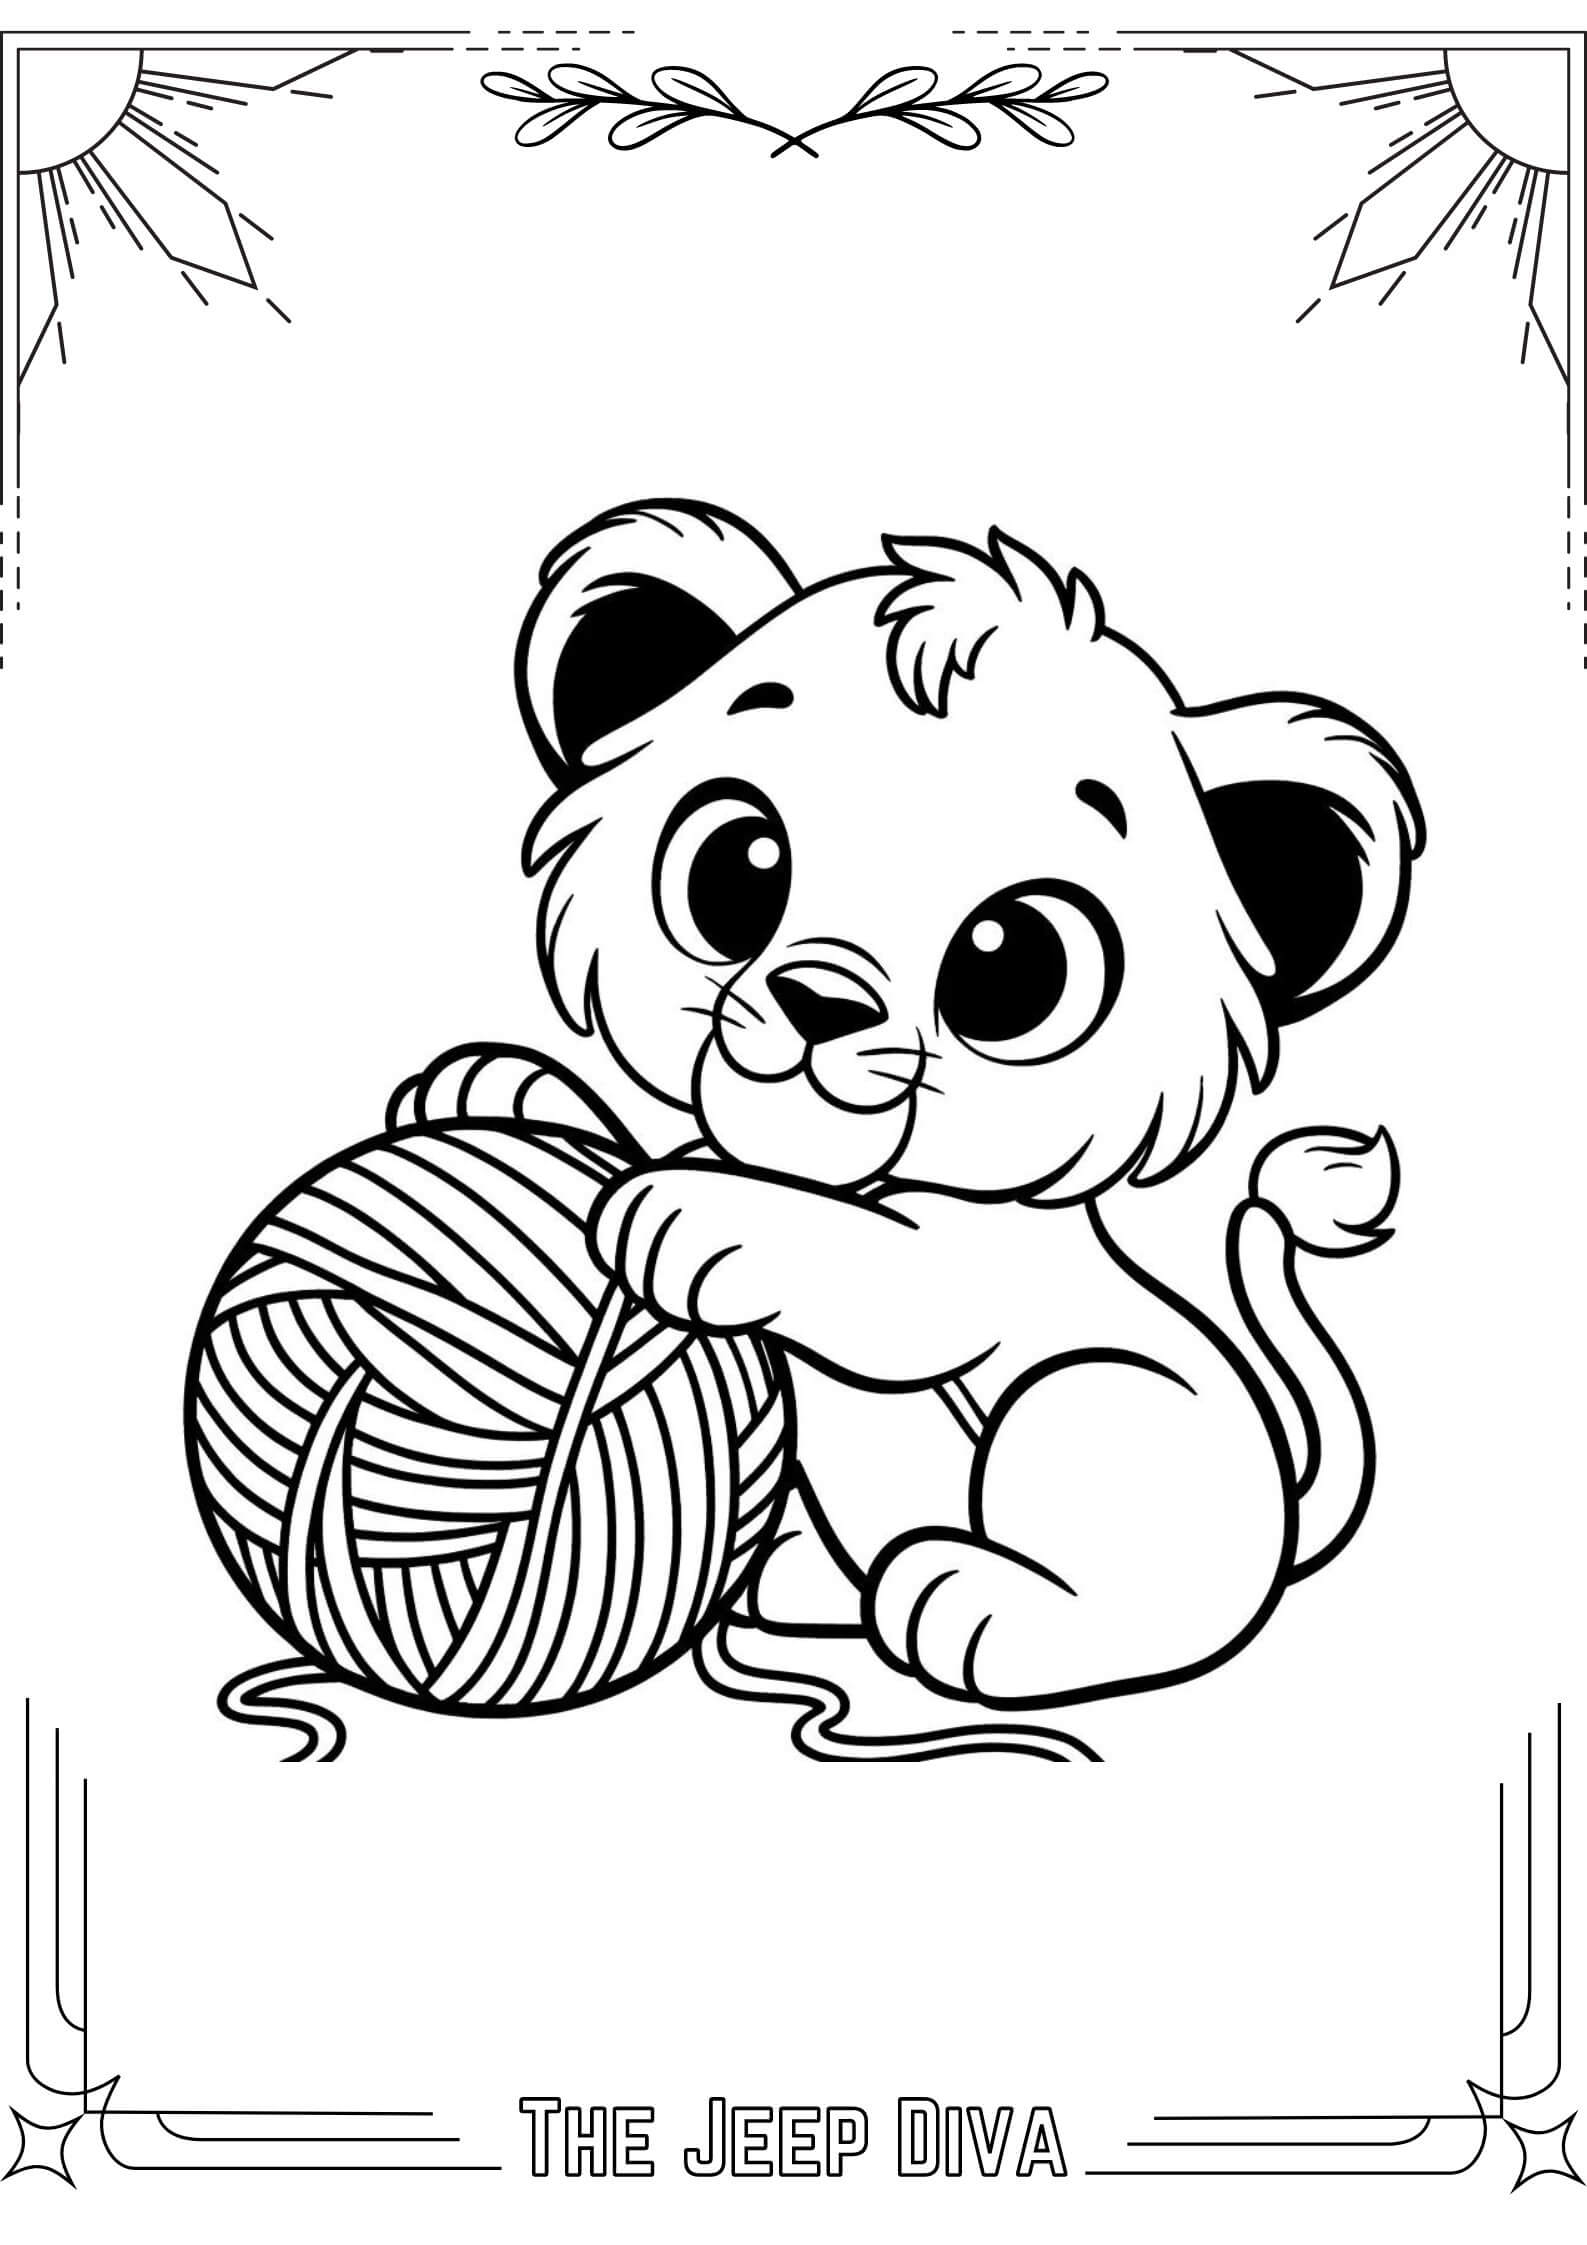 The Jeep Diva Coloring Page Lion Medium Difficulty 1